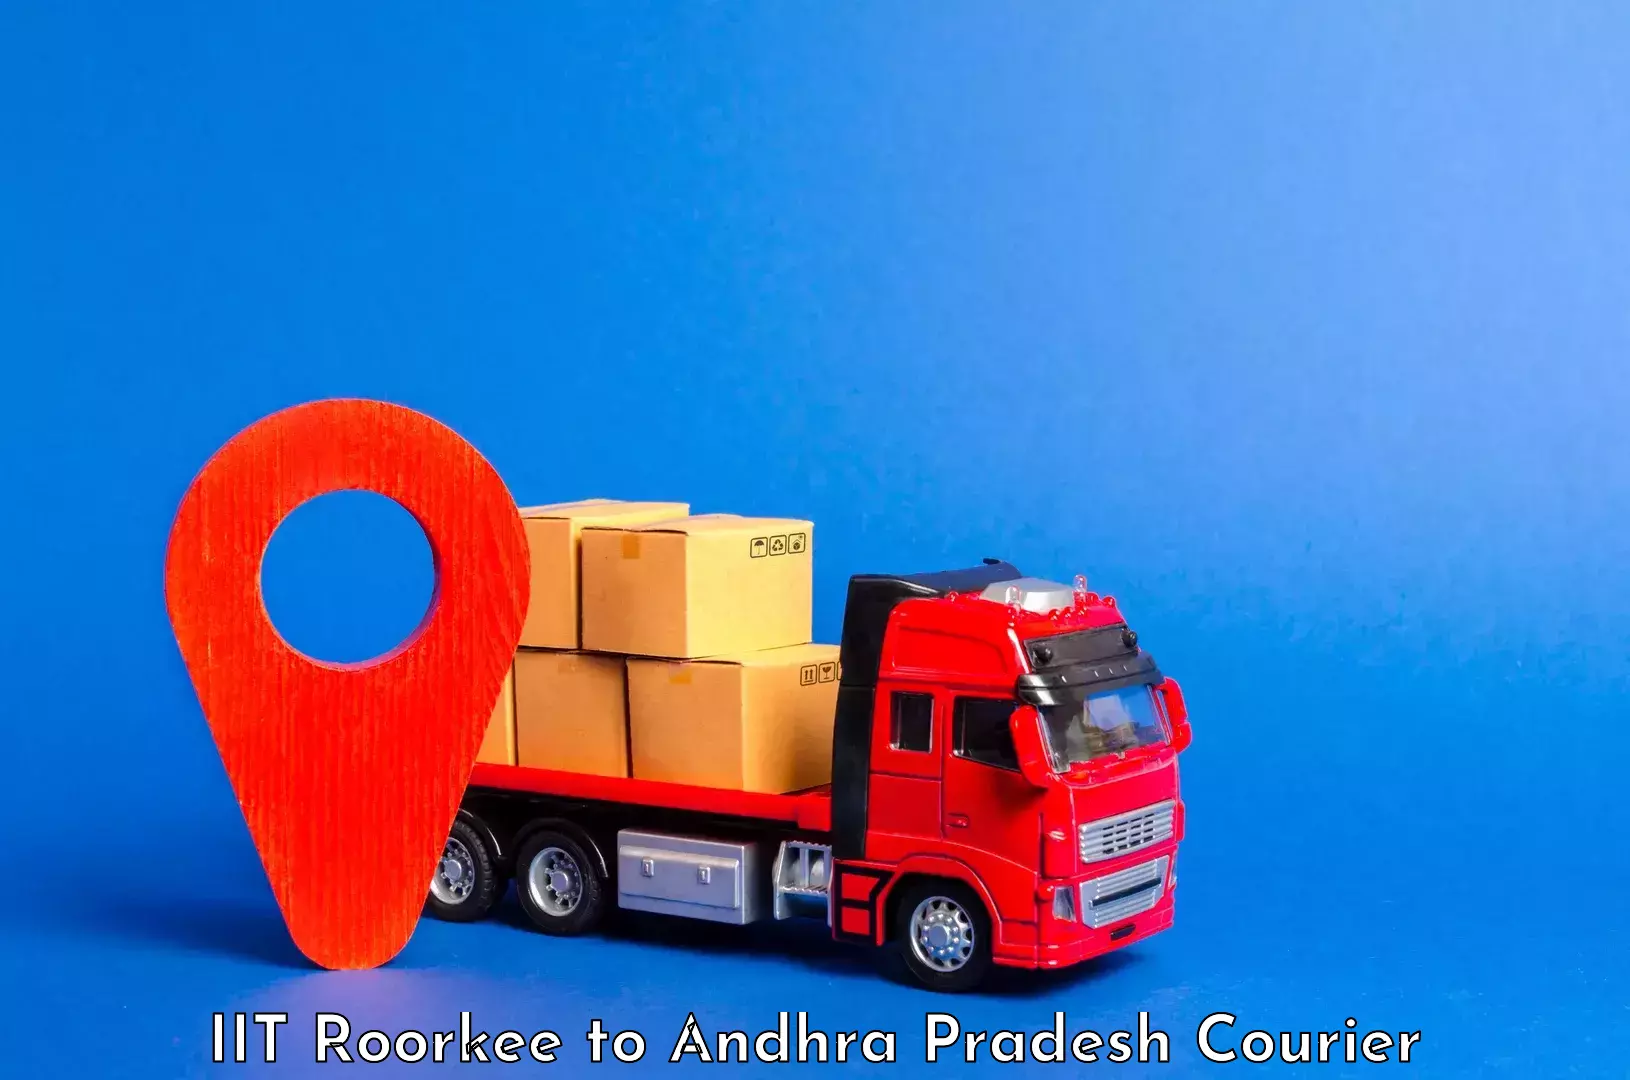 Luggage delivery app IIT Roorkee to Sirvella